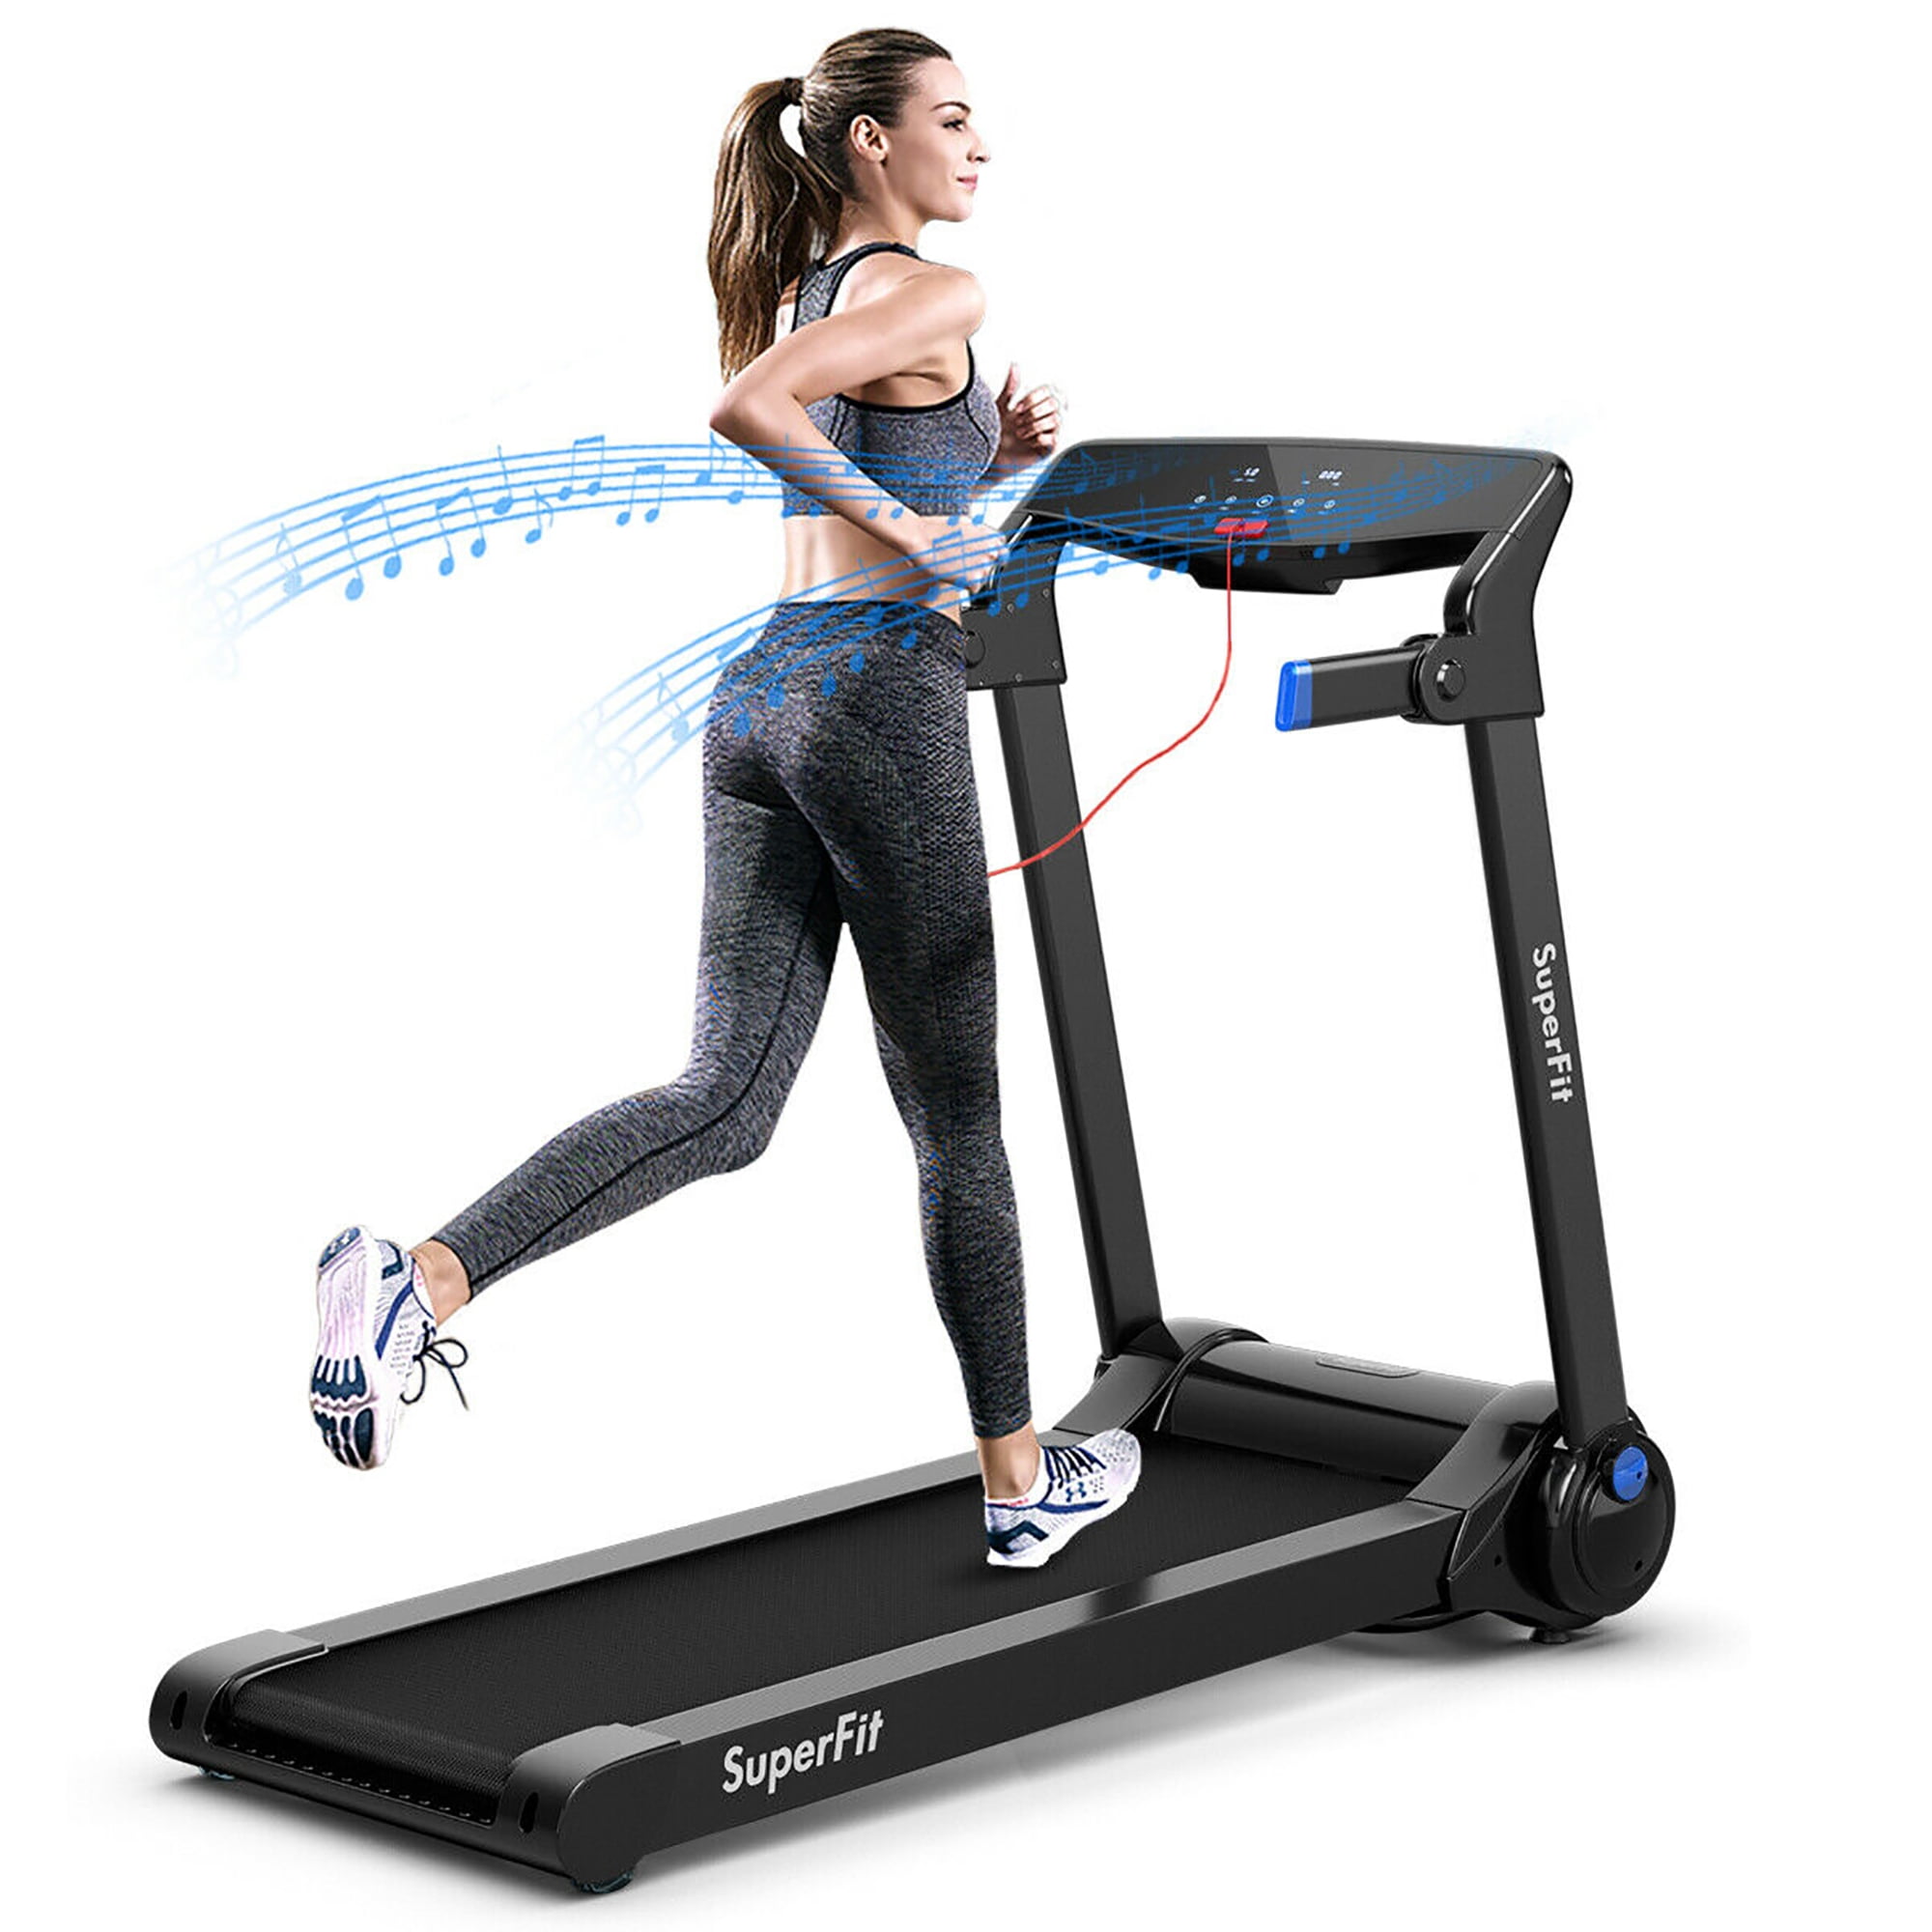 LCD and Pulse Monitor FondRun Magnetic Levitation Shock-Absorbing Treadmill for Home Bluetooth Powerful 3.25 HP 2400W Folding Treadmill for Running and Walking Jogging Exercise with Speaker 